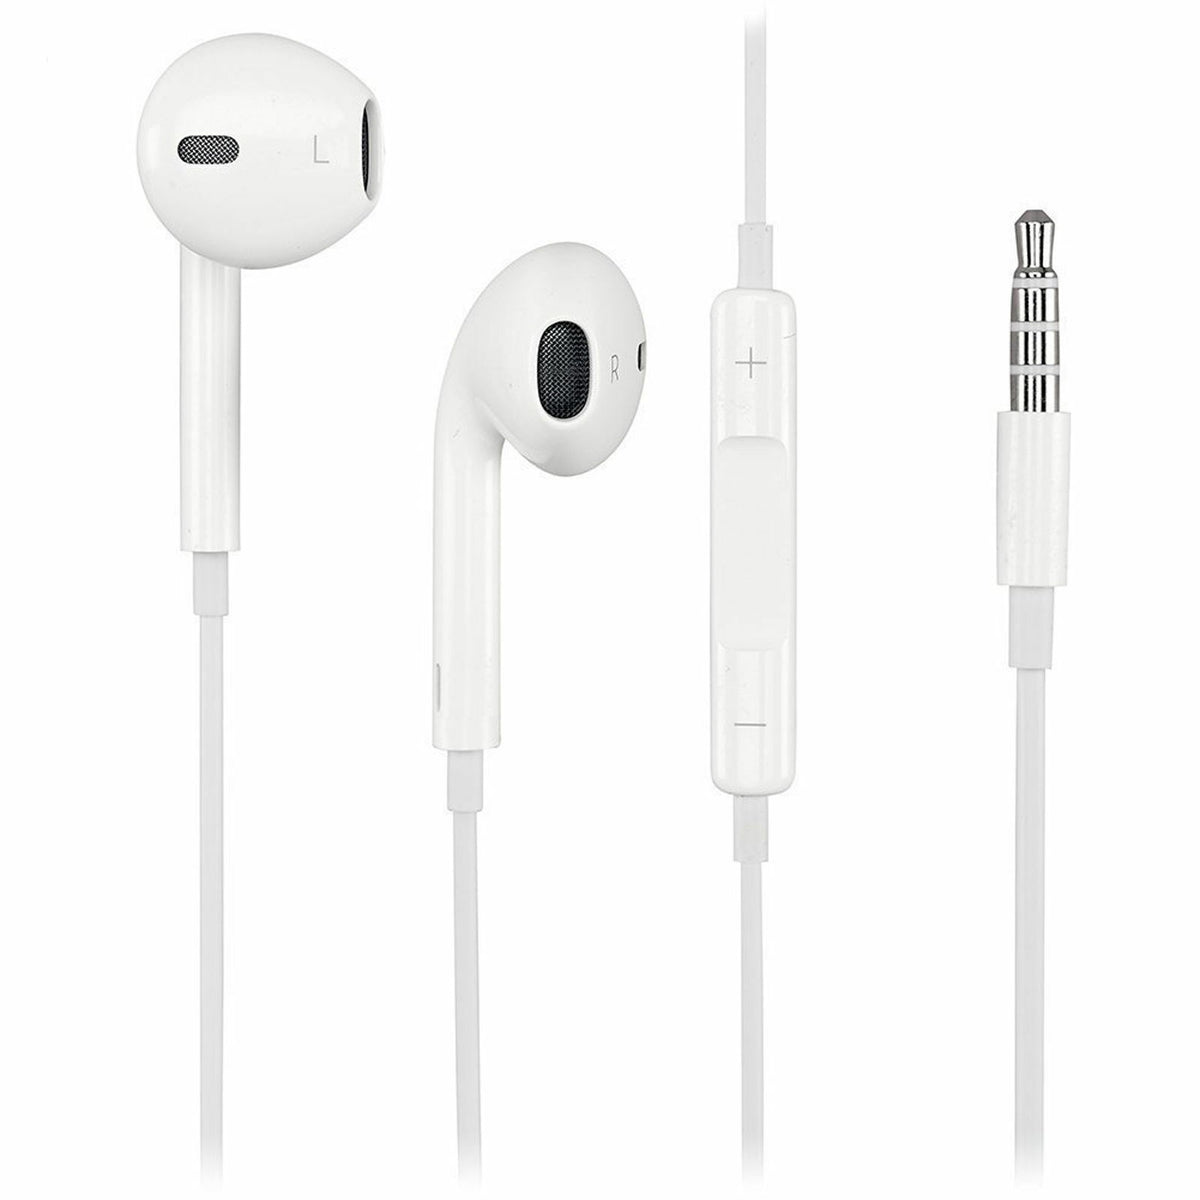 Brand New Headphones For iPhone / Samsung with Aux 3.5mm